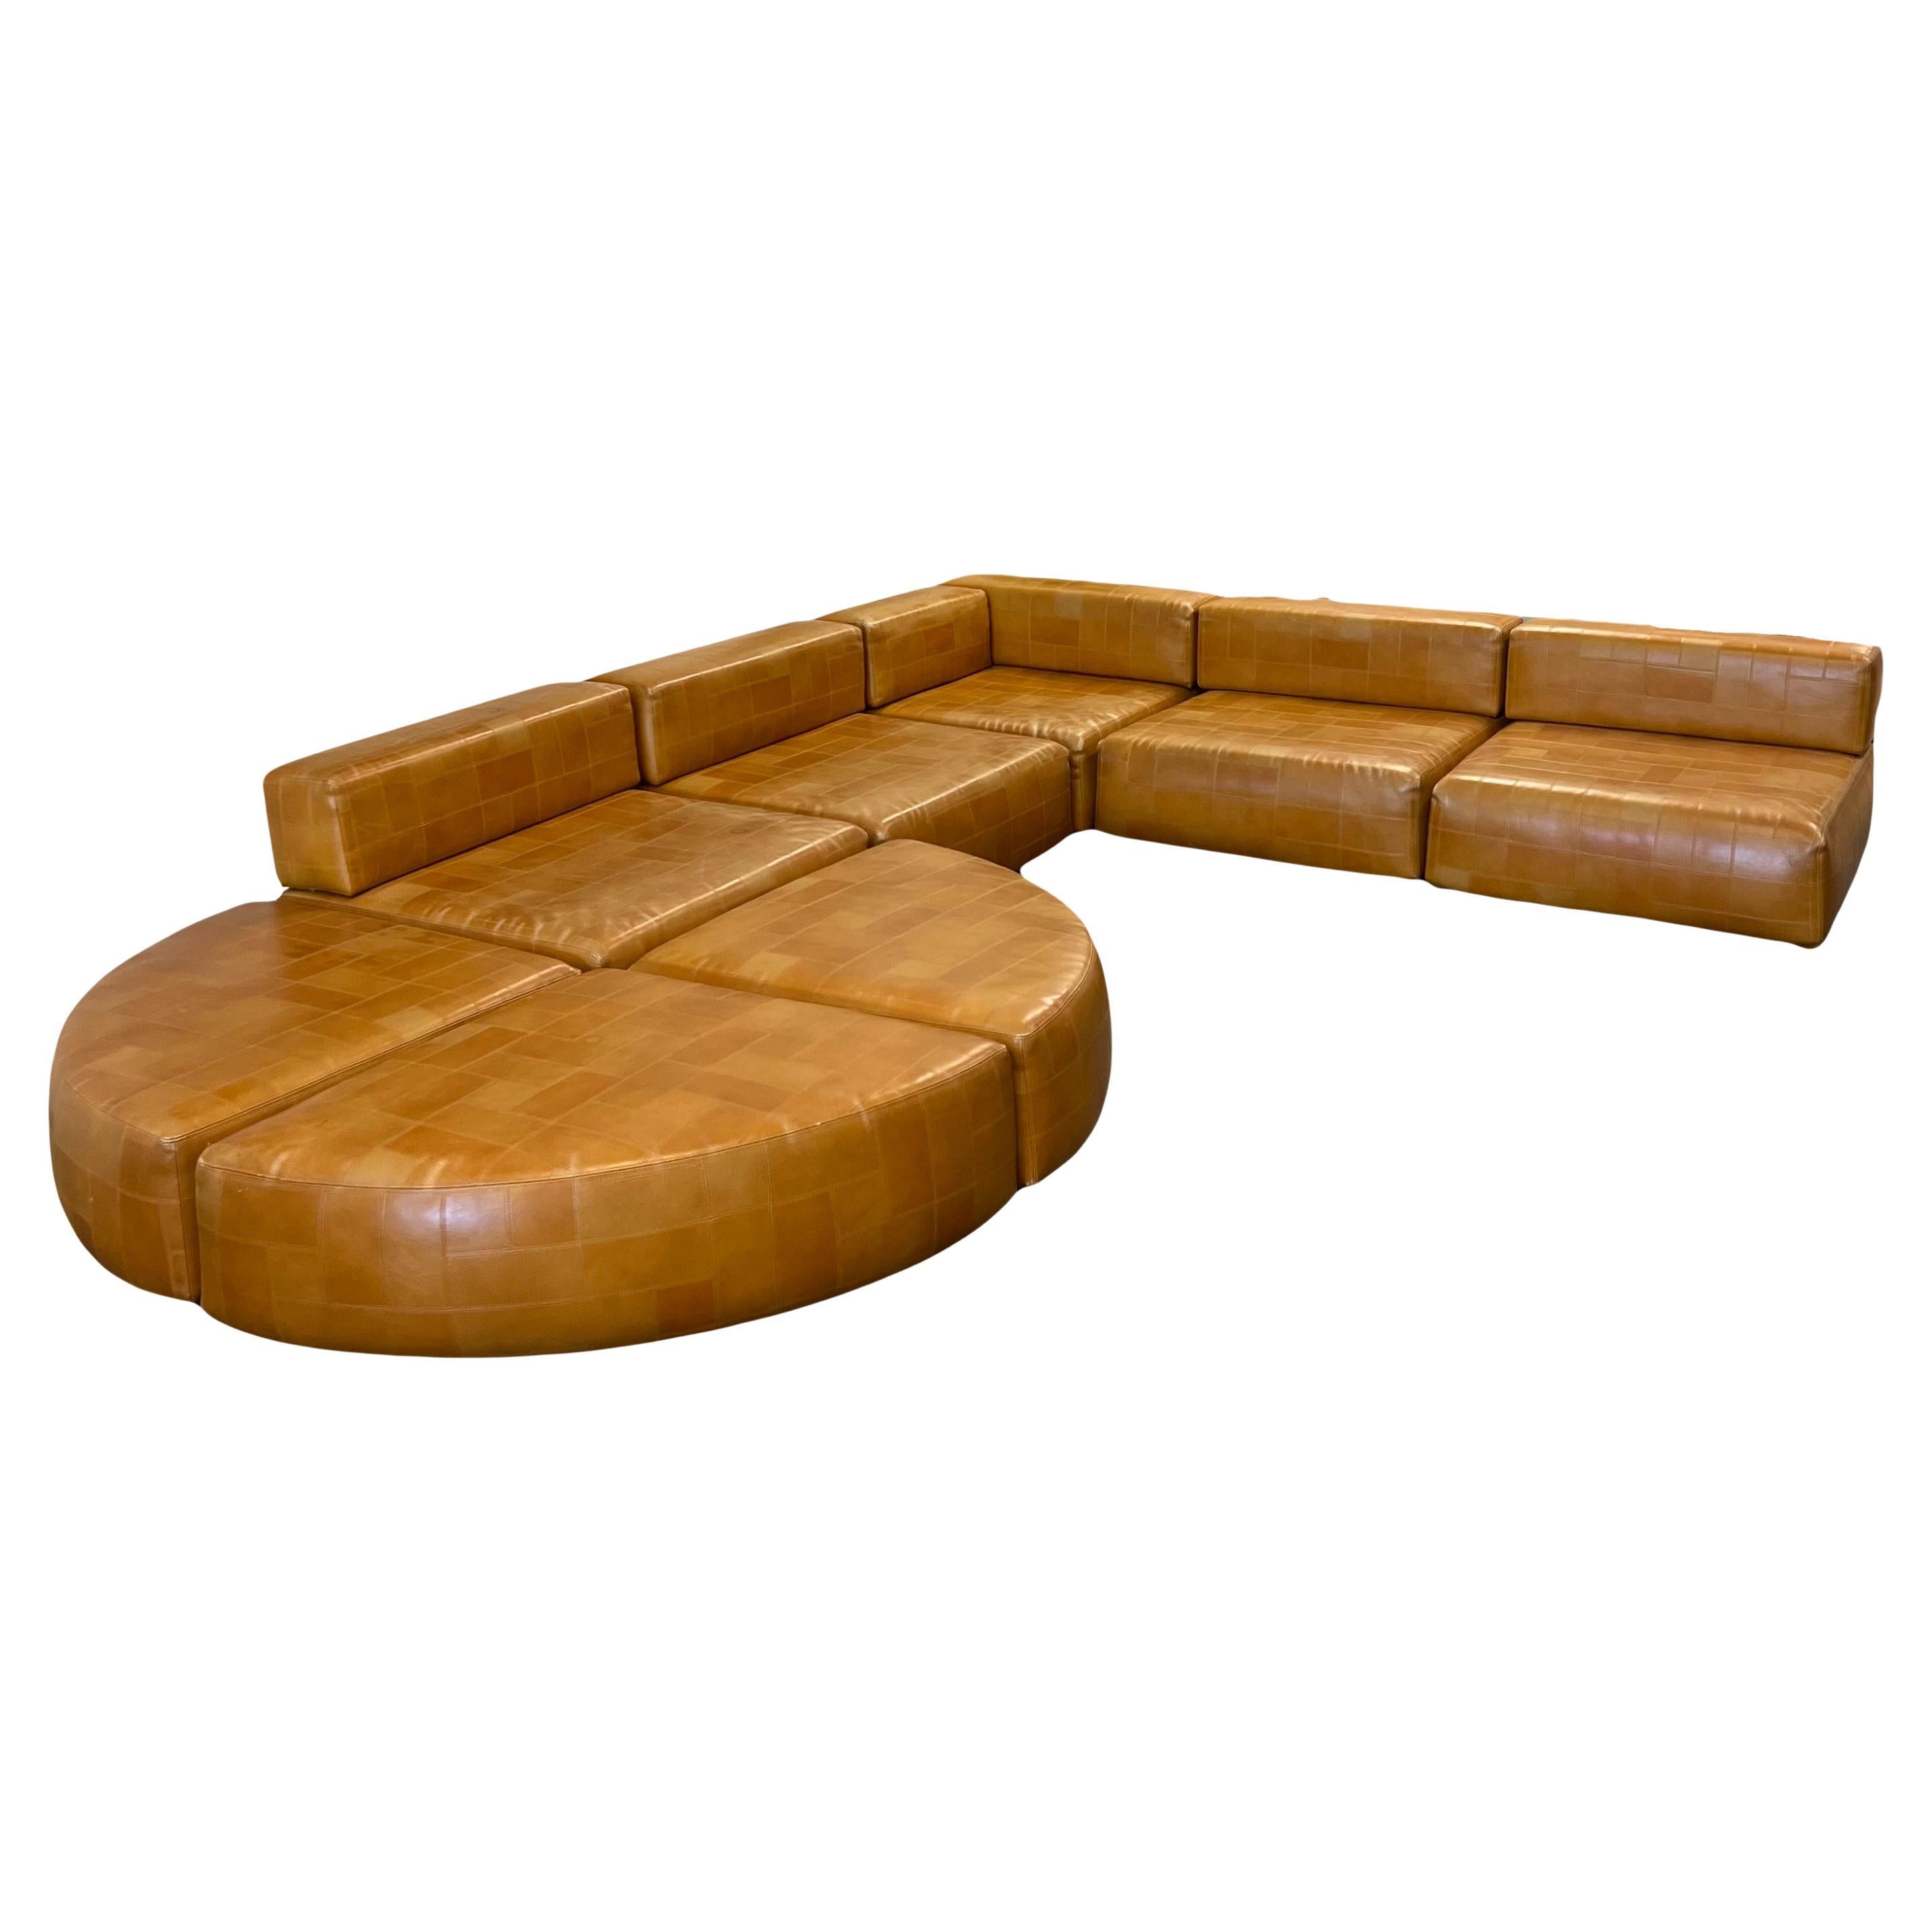 Rare Harvey Probber Patchwork Leather Sectional Sofa